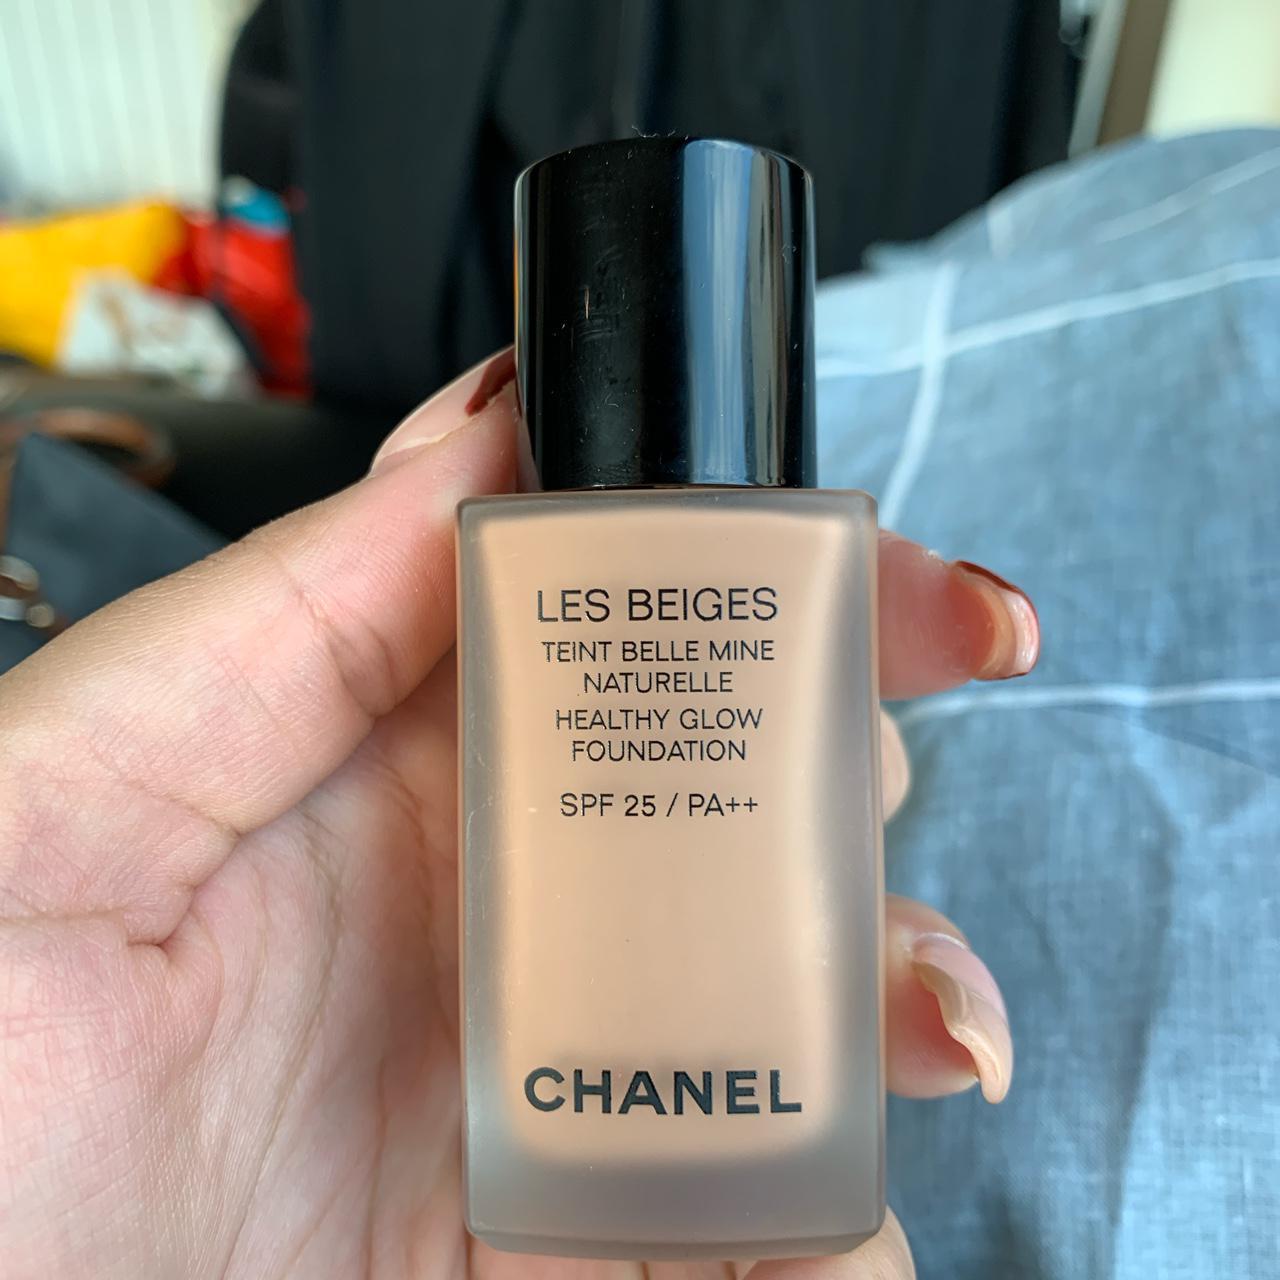 Chanel les beiges foundation shade n•70. Almost new, - Depop